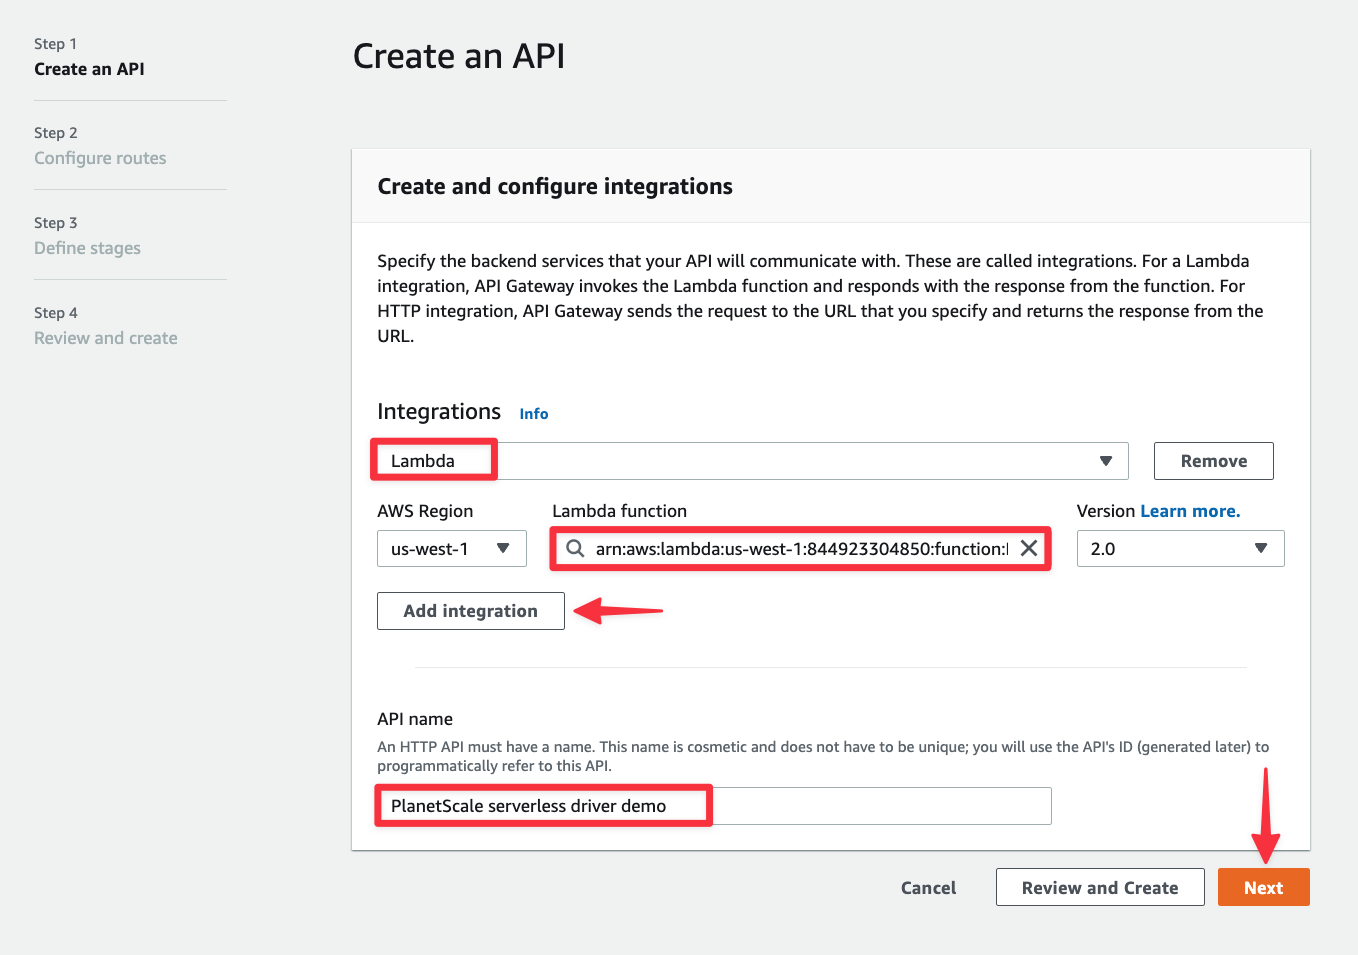 The first step of the Create API process.